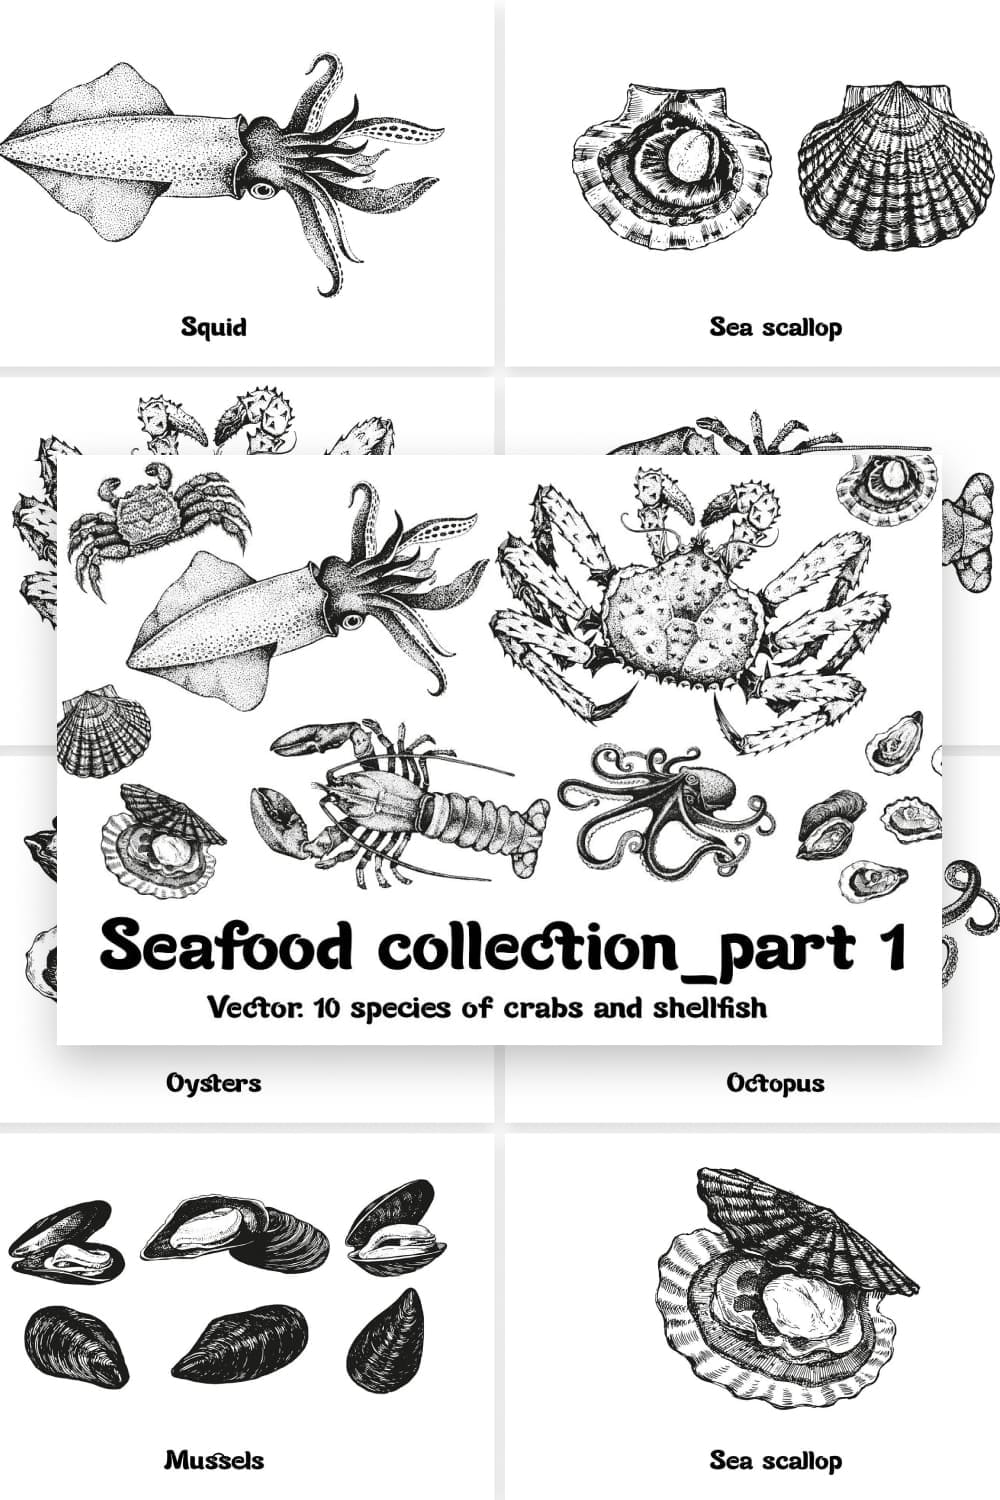 Seafood Collection Part 1 pinterest image.